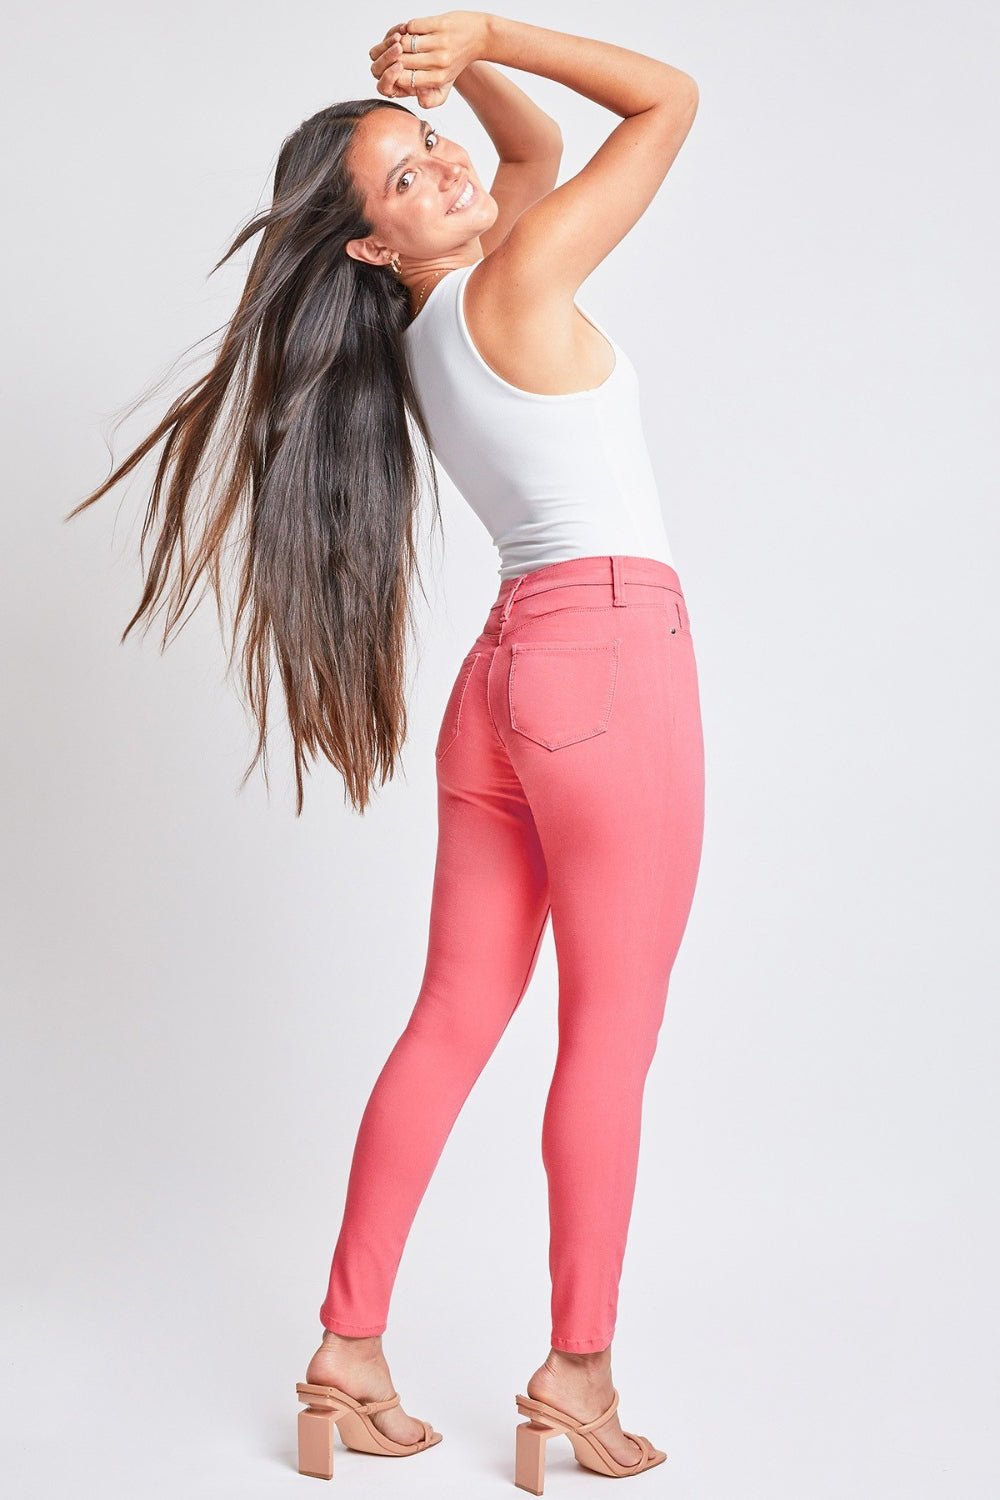 Hyperstretch Mid-Rise Skinny Jeans in Shell PinkJeansYMI Jeanswear